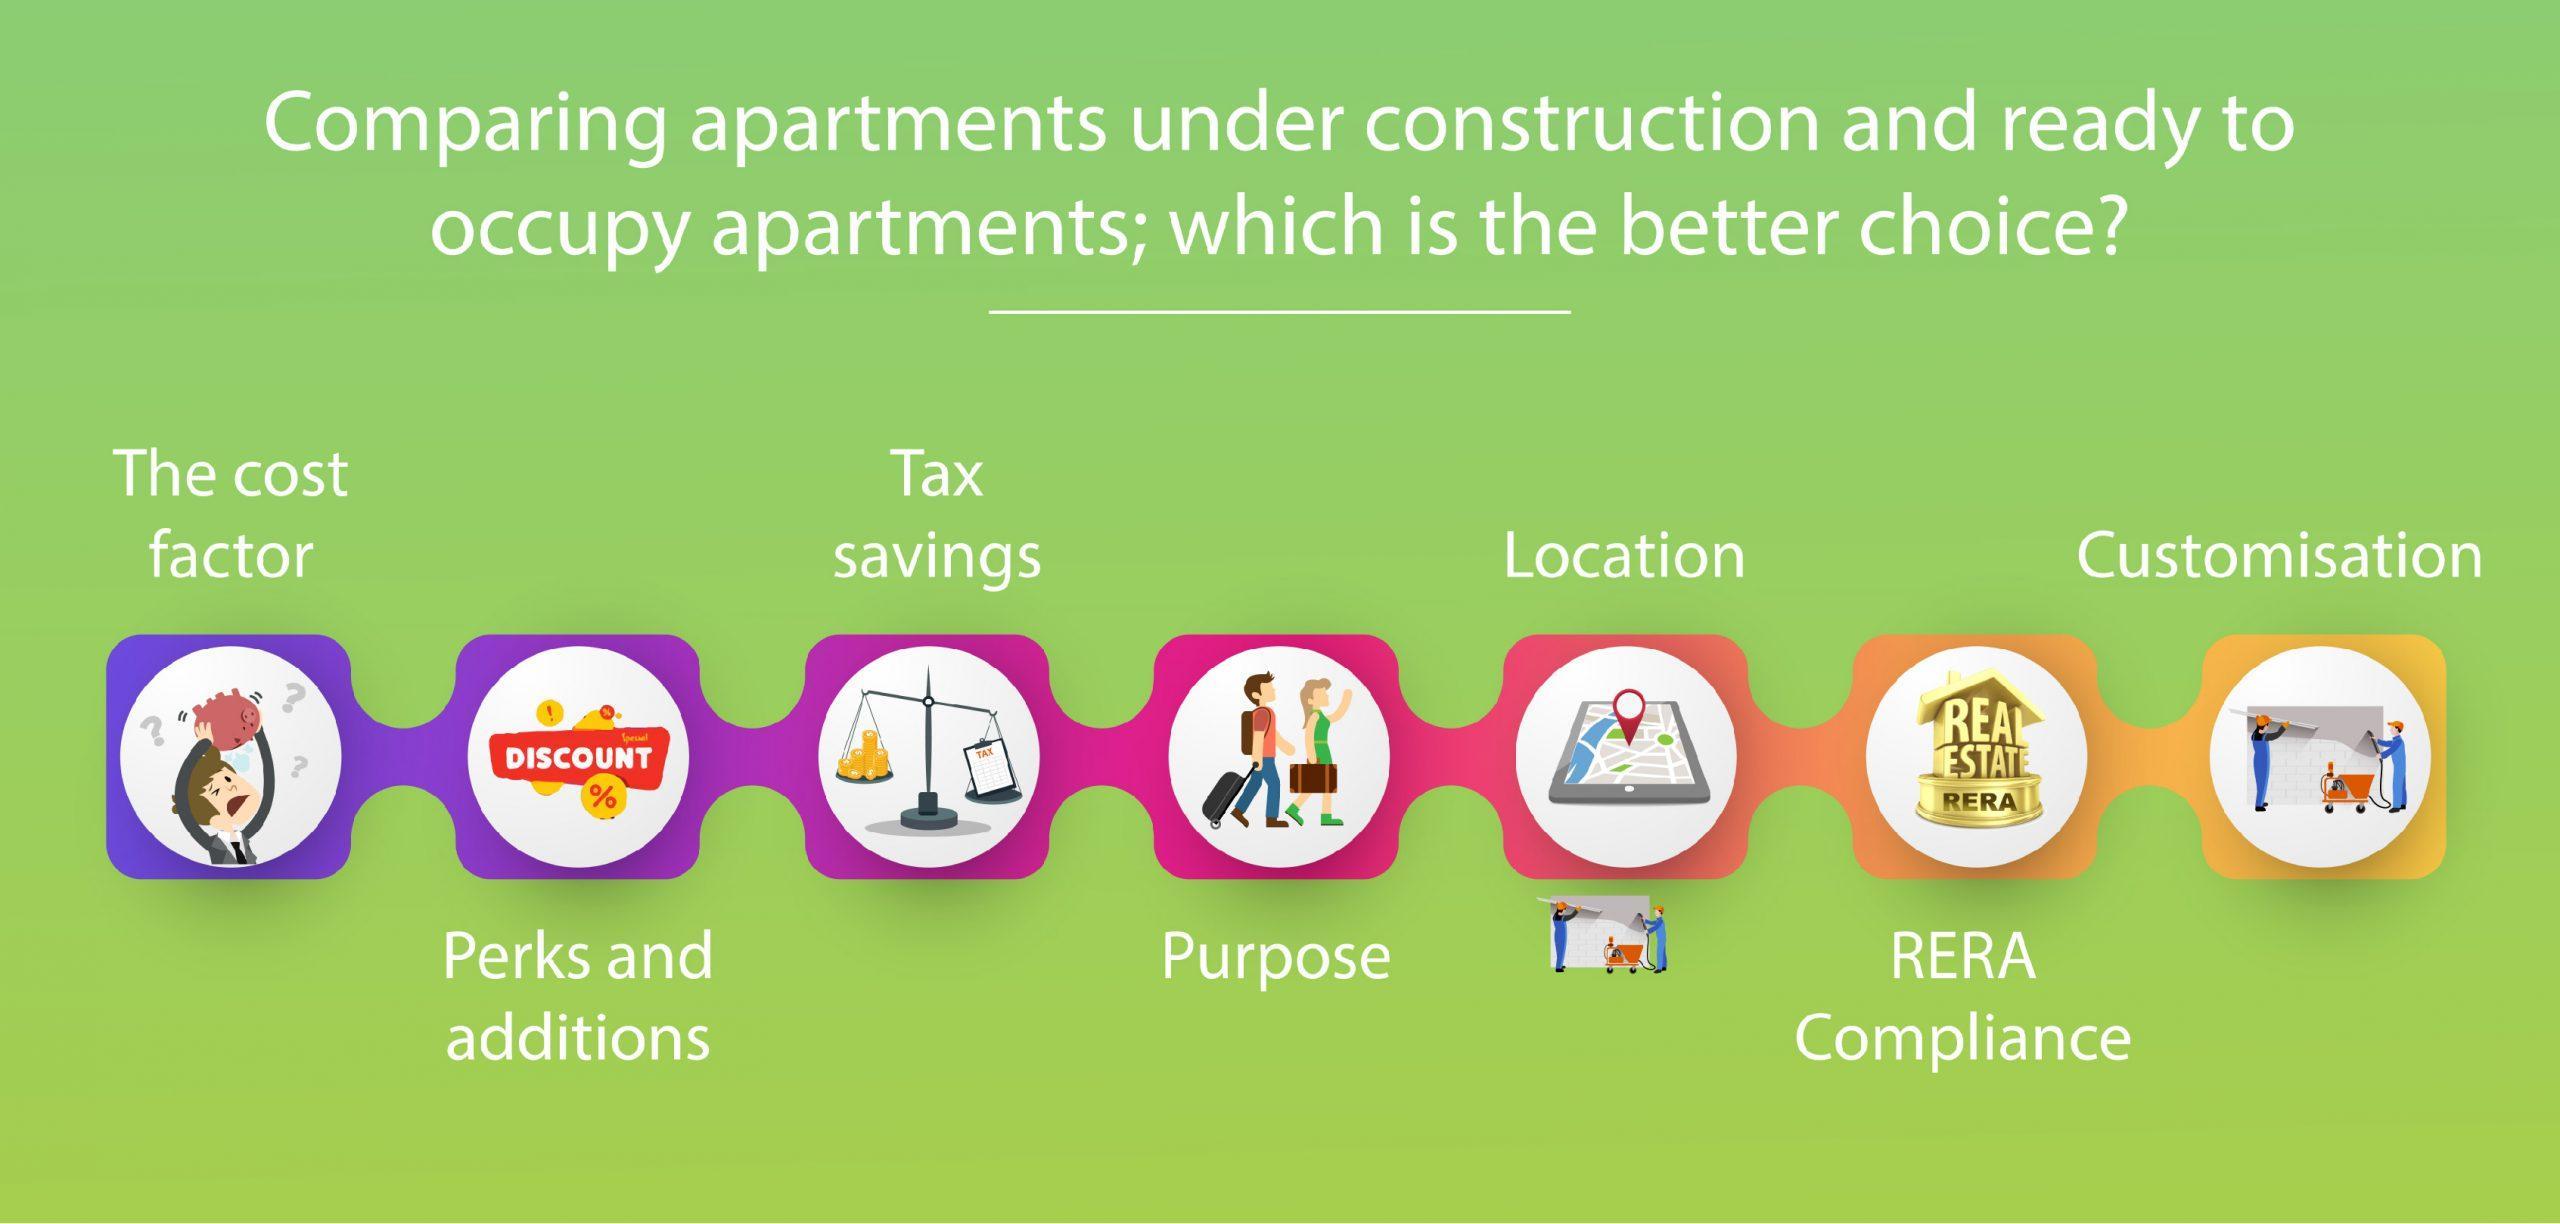 Comparing apartments under construction and ready to occupy apartments; which is the better choice?